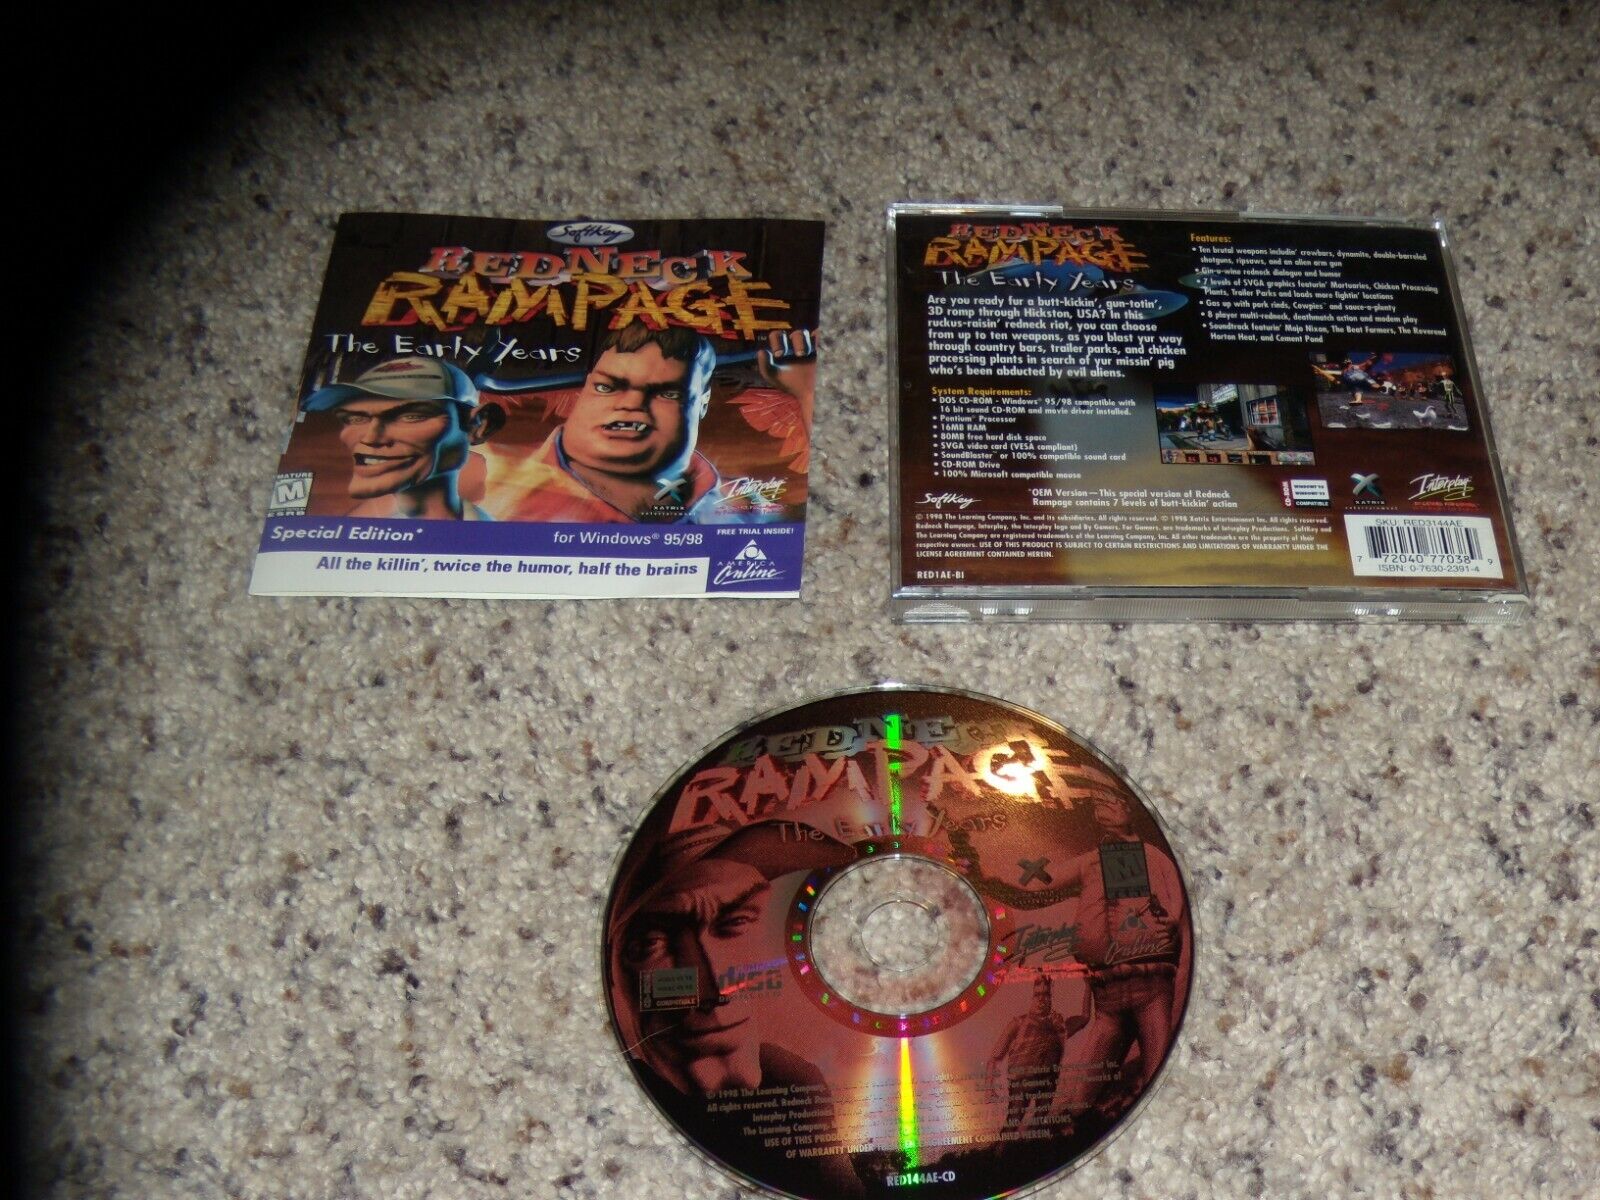 Redneck Rampage: The Early Years (PC, 1998) game